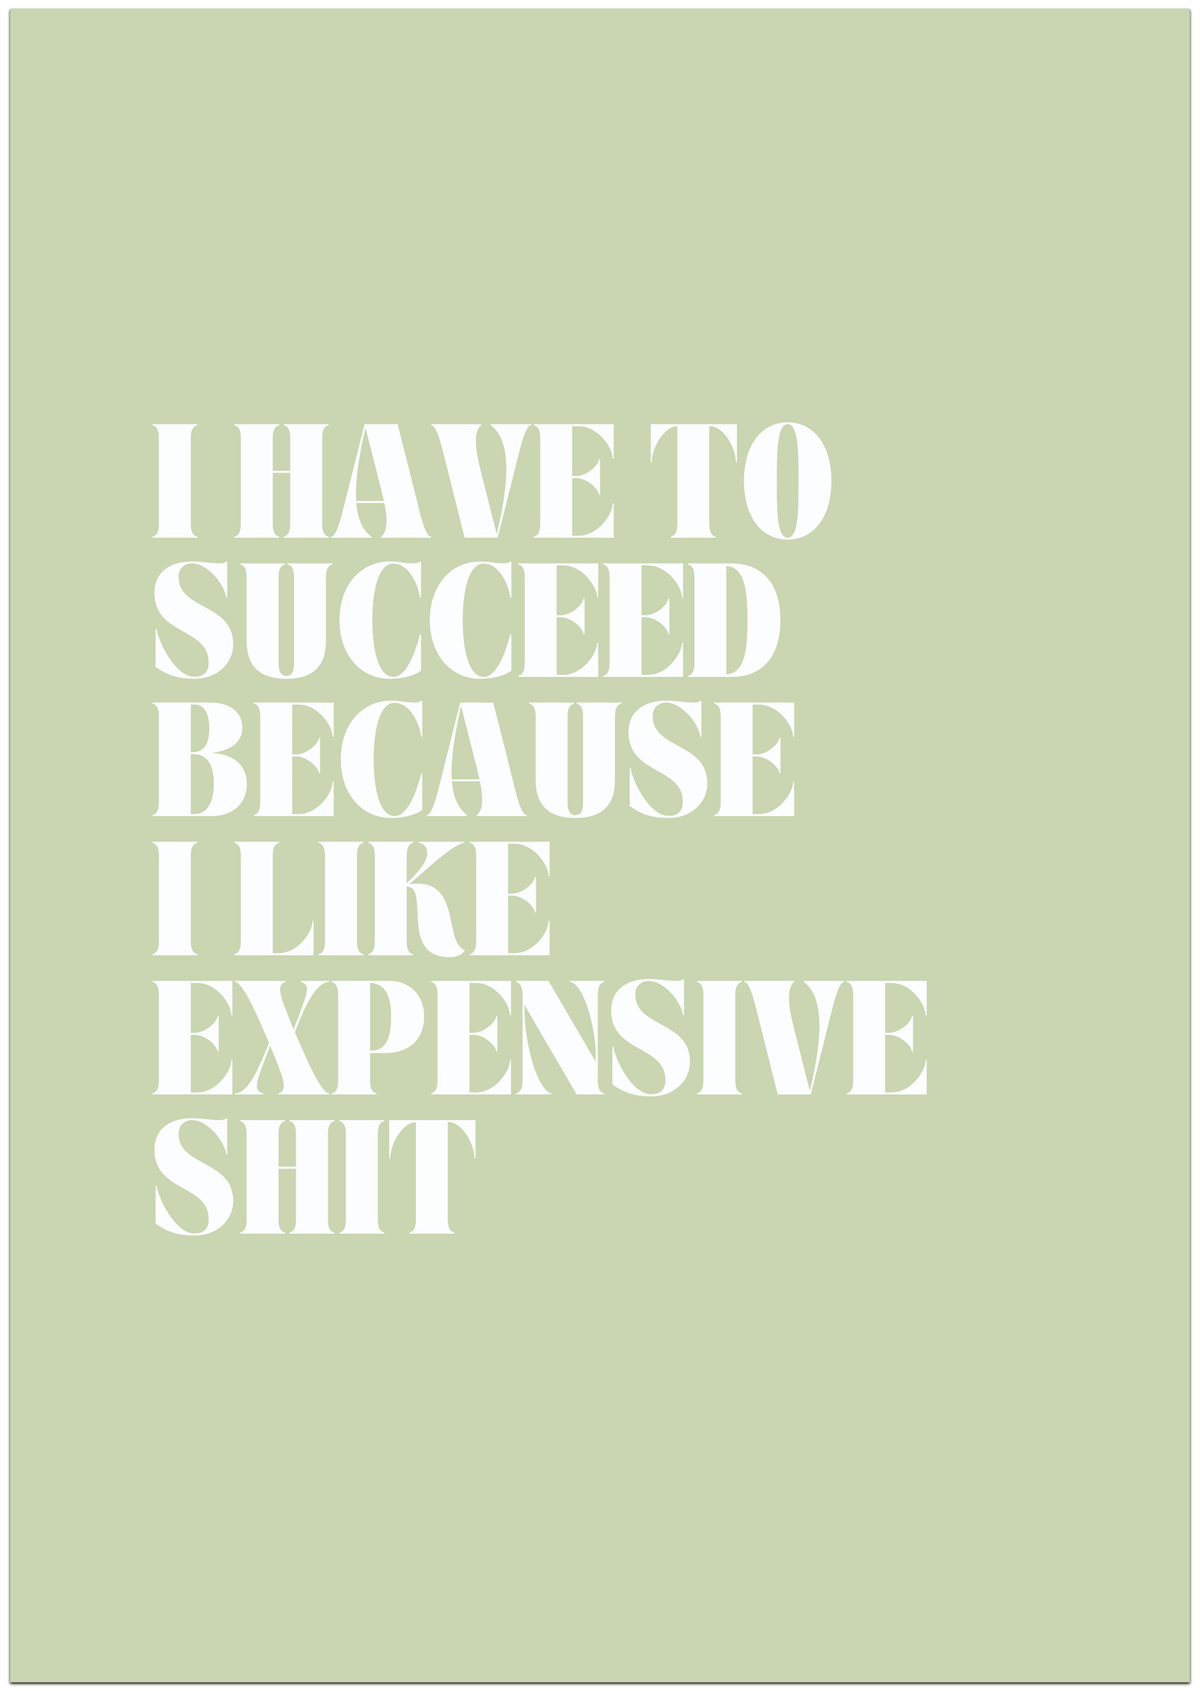 I have to succeed Poster